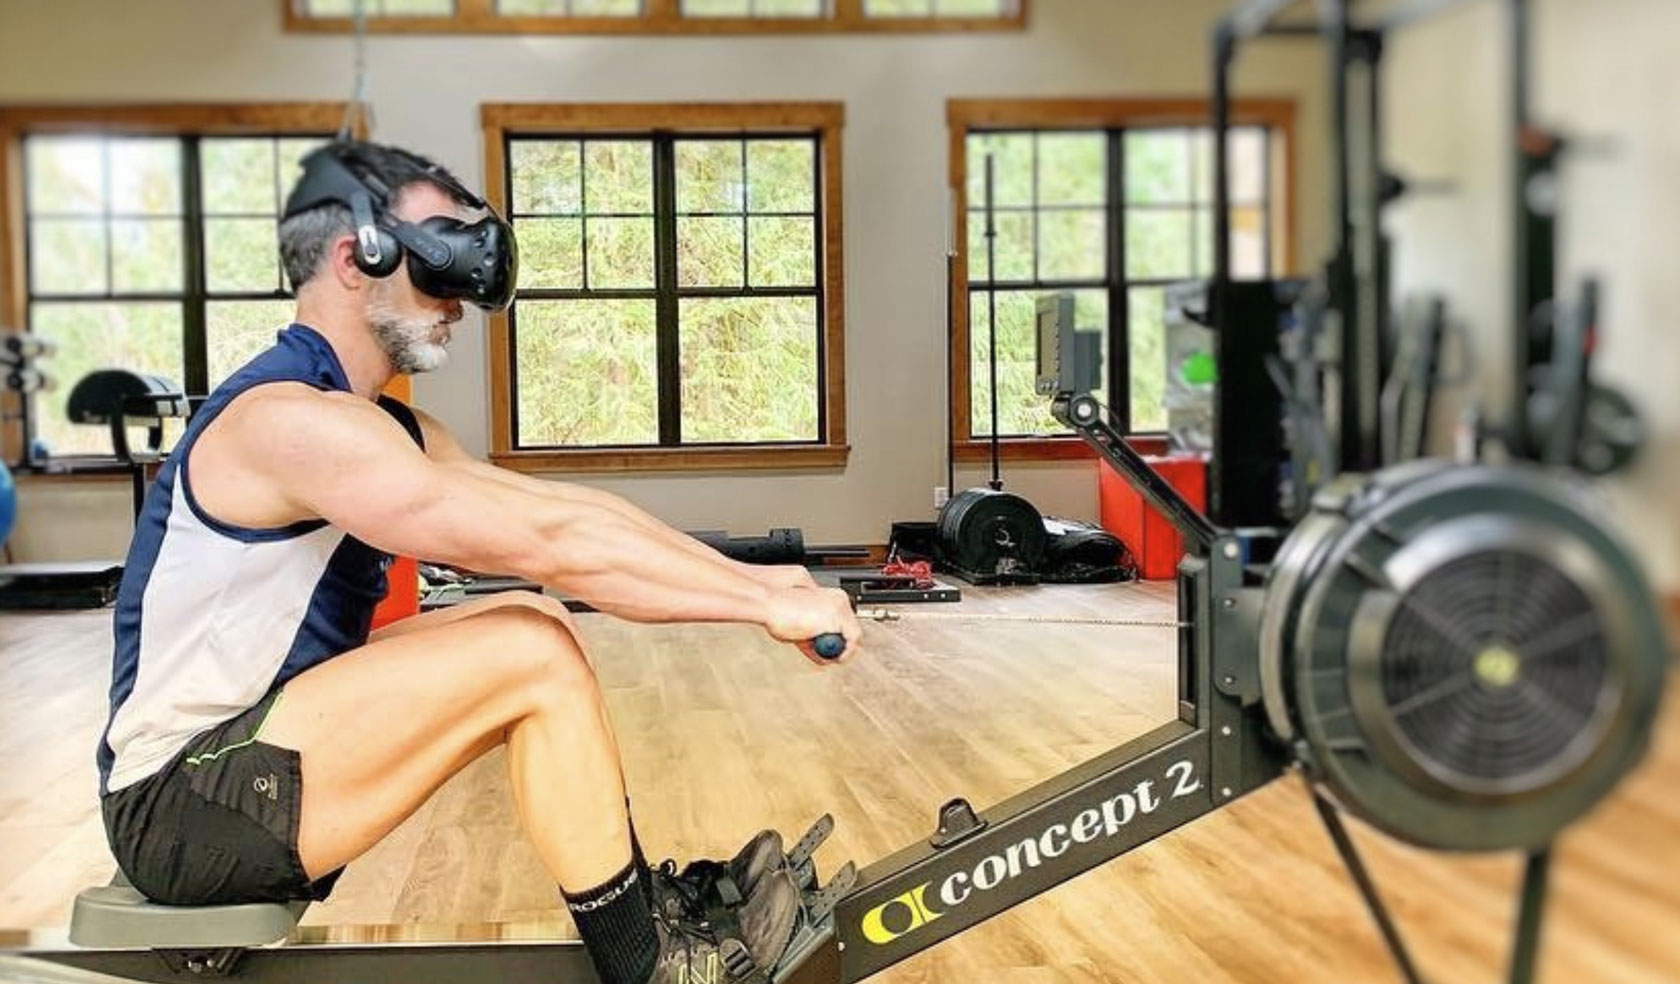 Man using Holofit VR headset with Concept 2 rowing machine